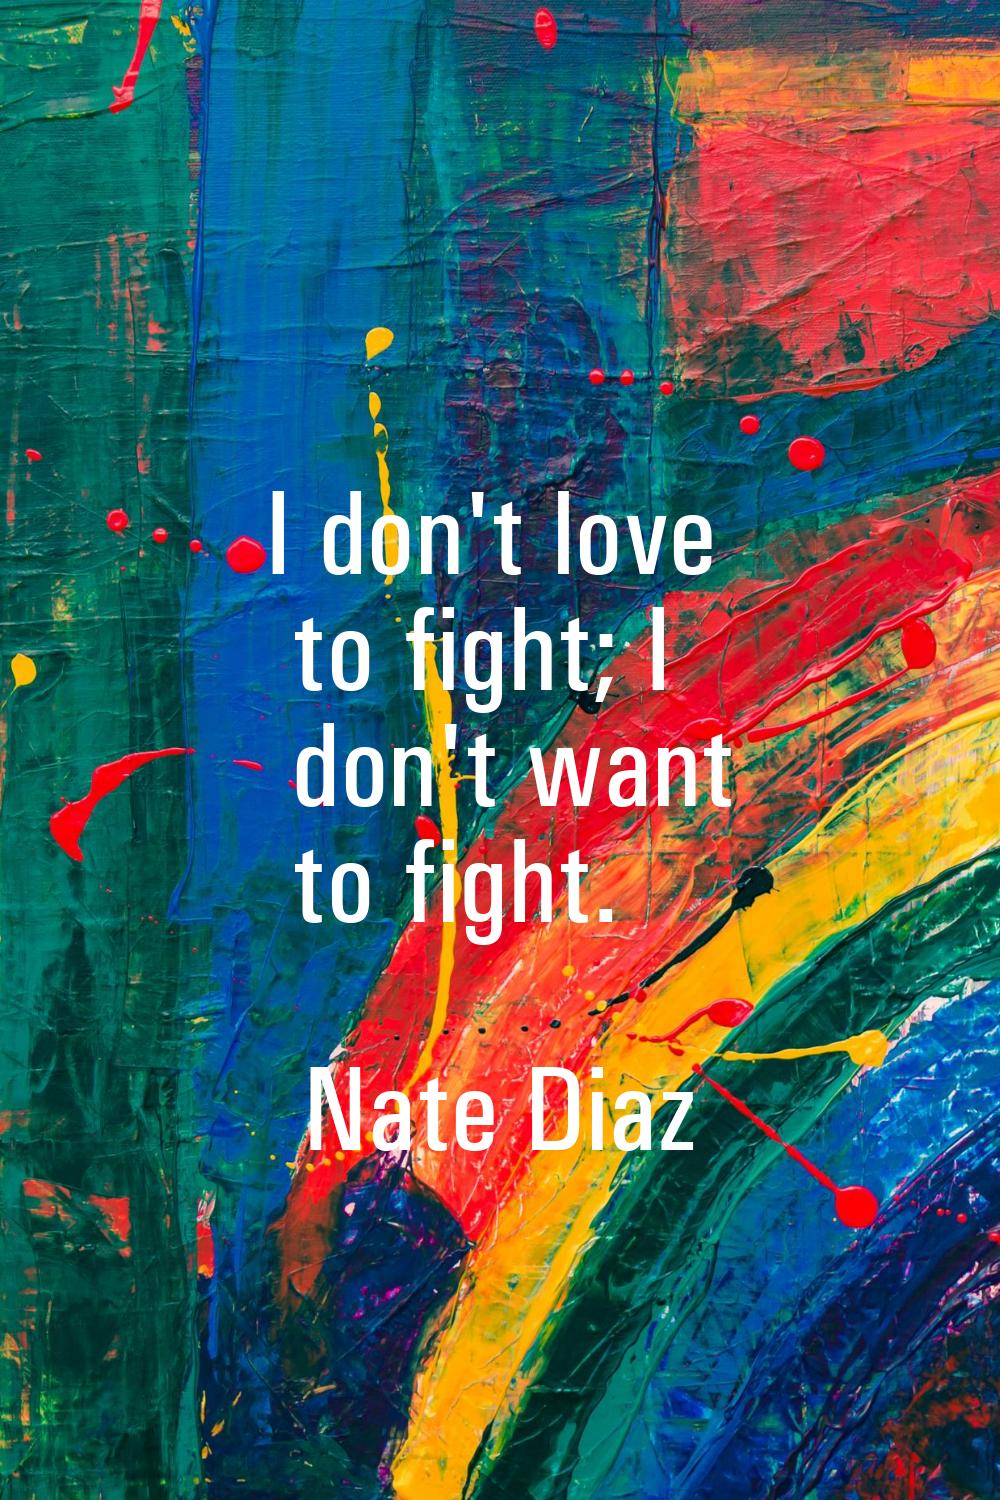 I don't love to fight; I don't want to fight.